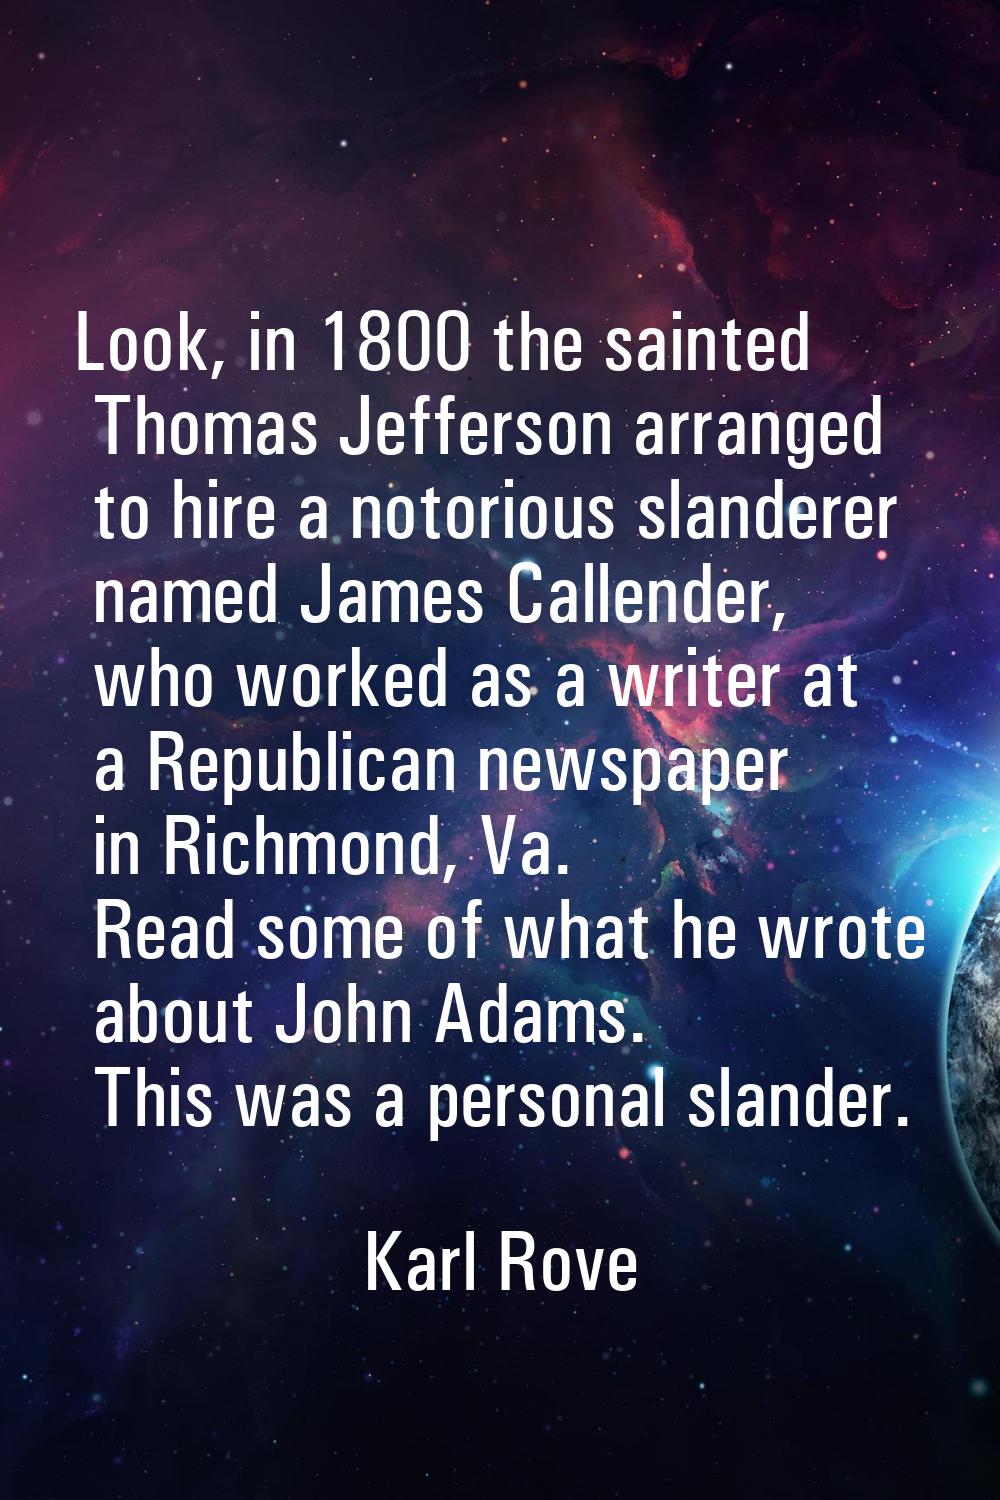 Look, in 1800 the sainted Thomas Jefferson arranged to hire a notorious slanderer named James Calle